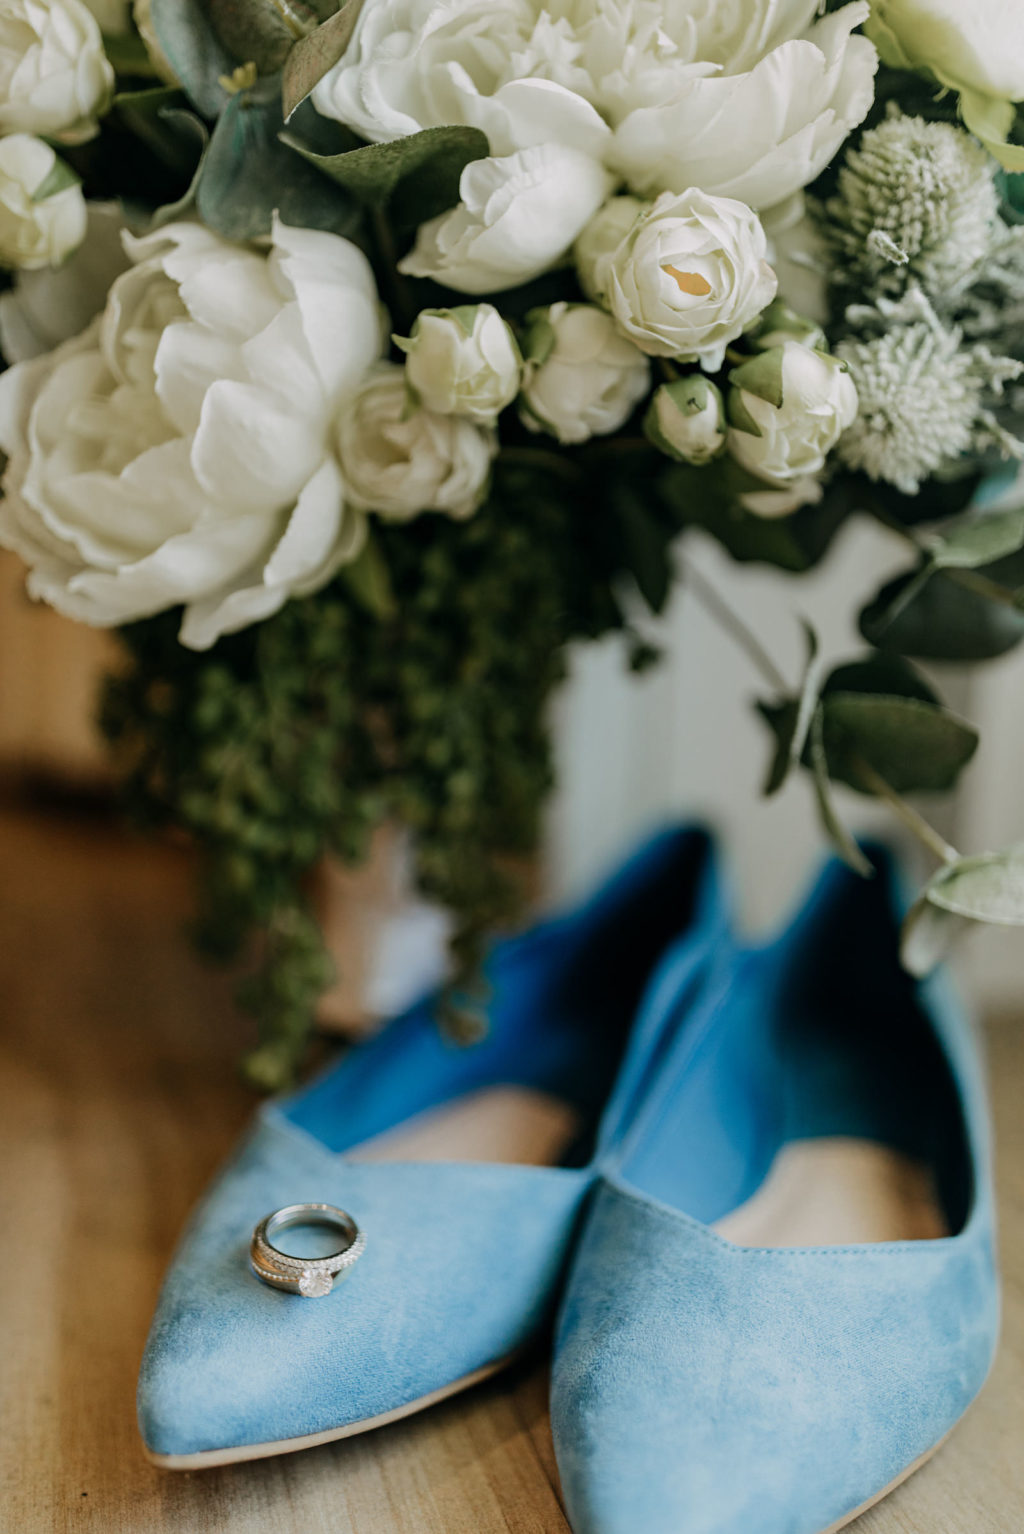 Bride Something Blue Pointed Velvet Wedding Shoes, Round Diamond Solitaire Engagement Ring, Classic White Floral Bouquet | Tampa Bay Wedding Photographer Amber McWhorter Photography